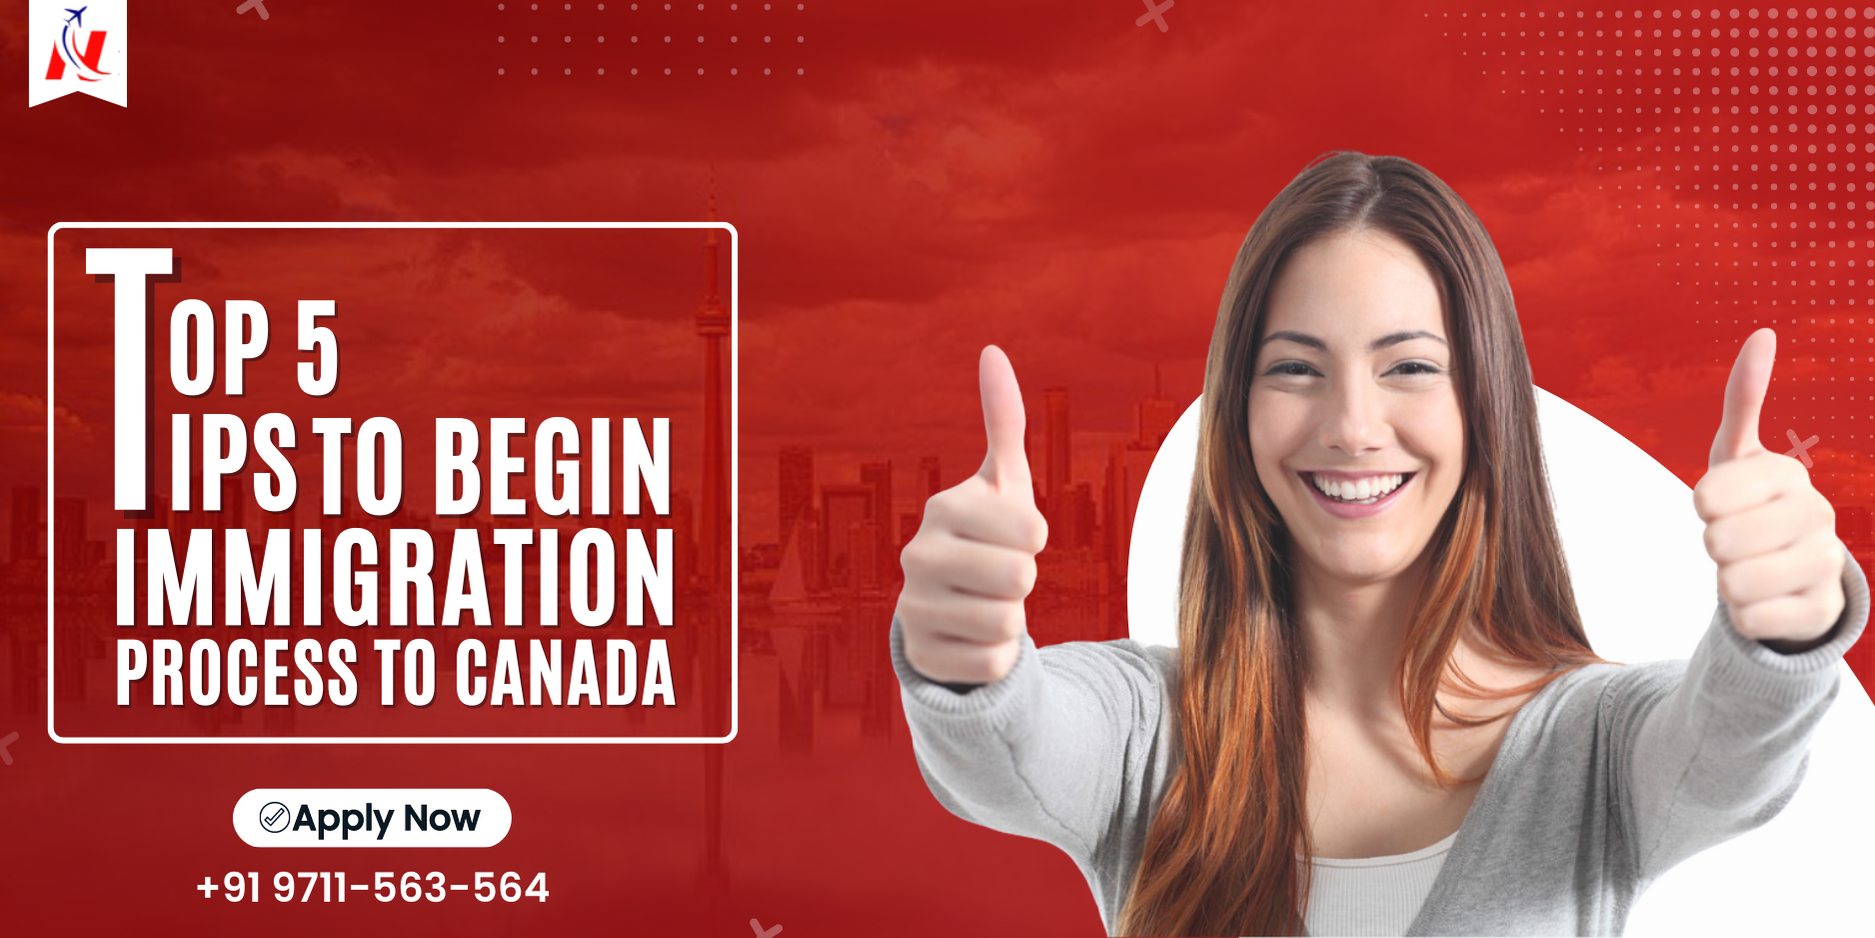 Top 5 Tips to Begin Immigration Process to Canada